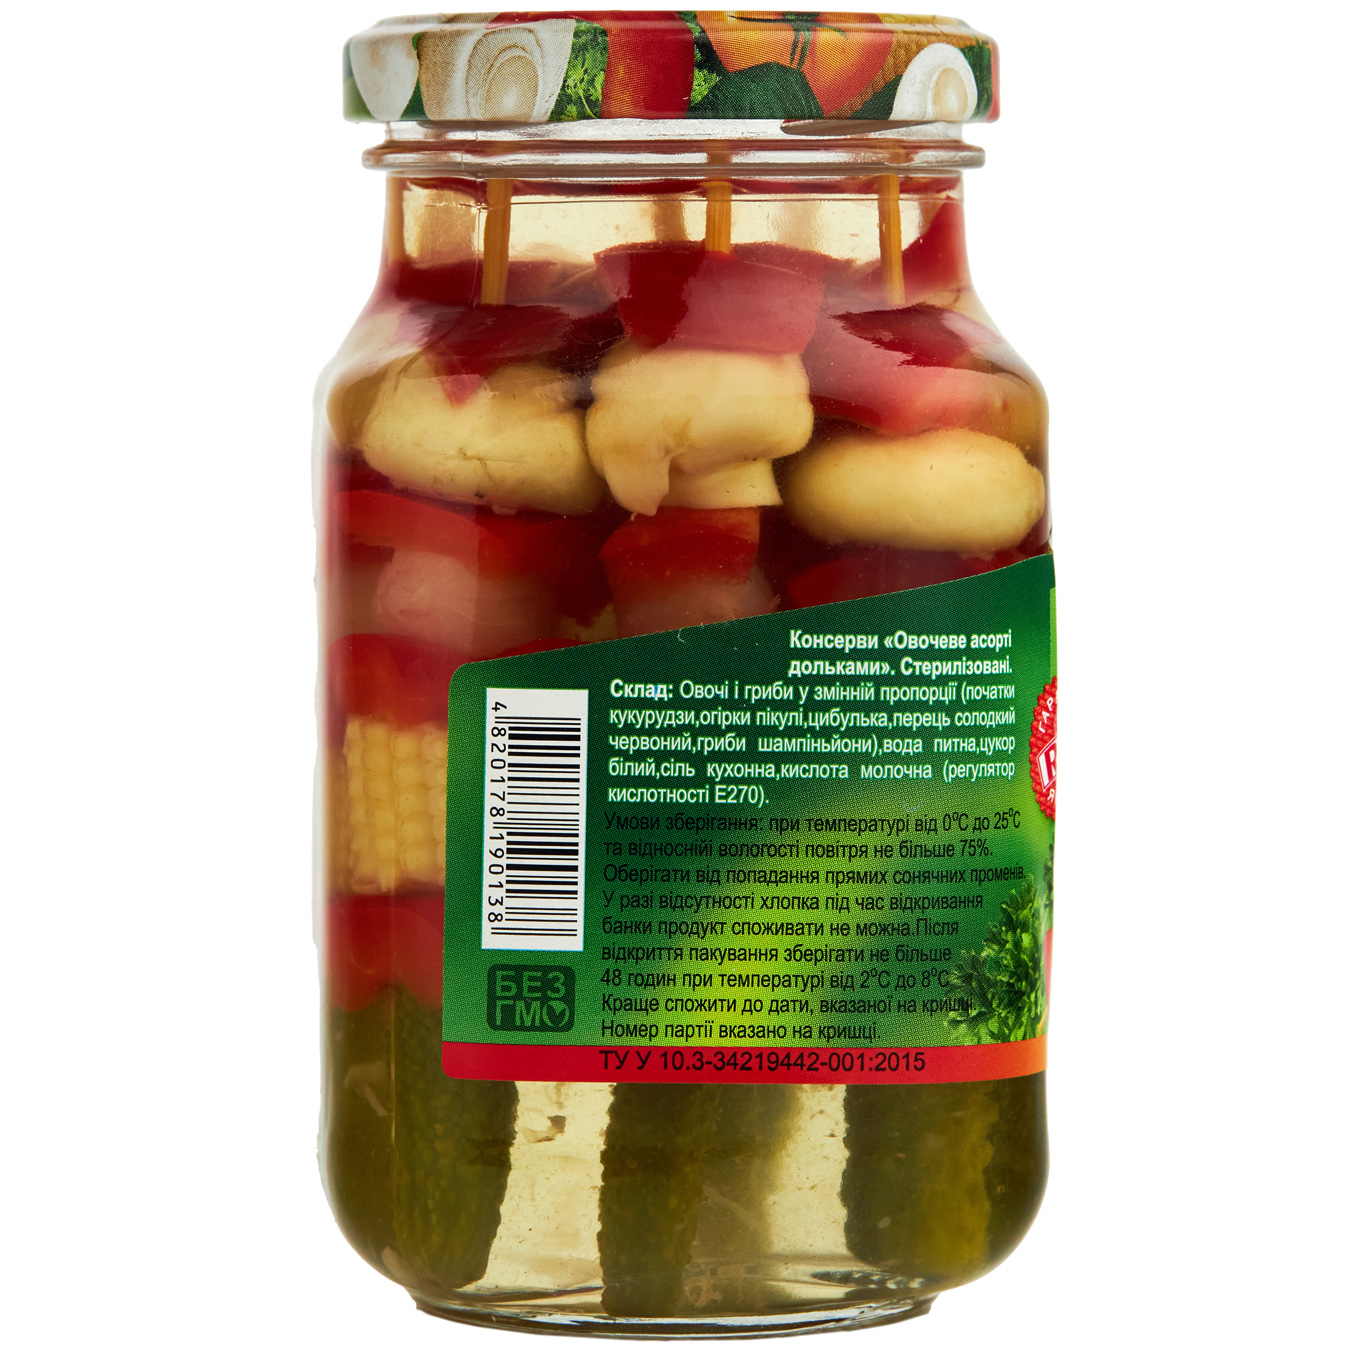 Rio canned vegetables 300ml 2